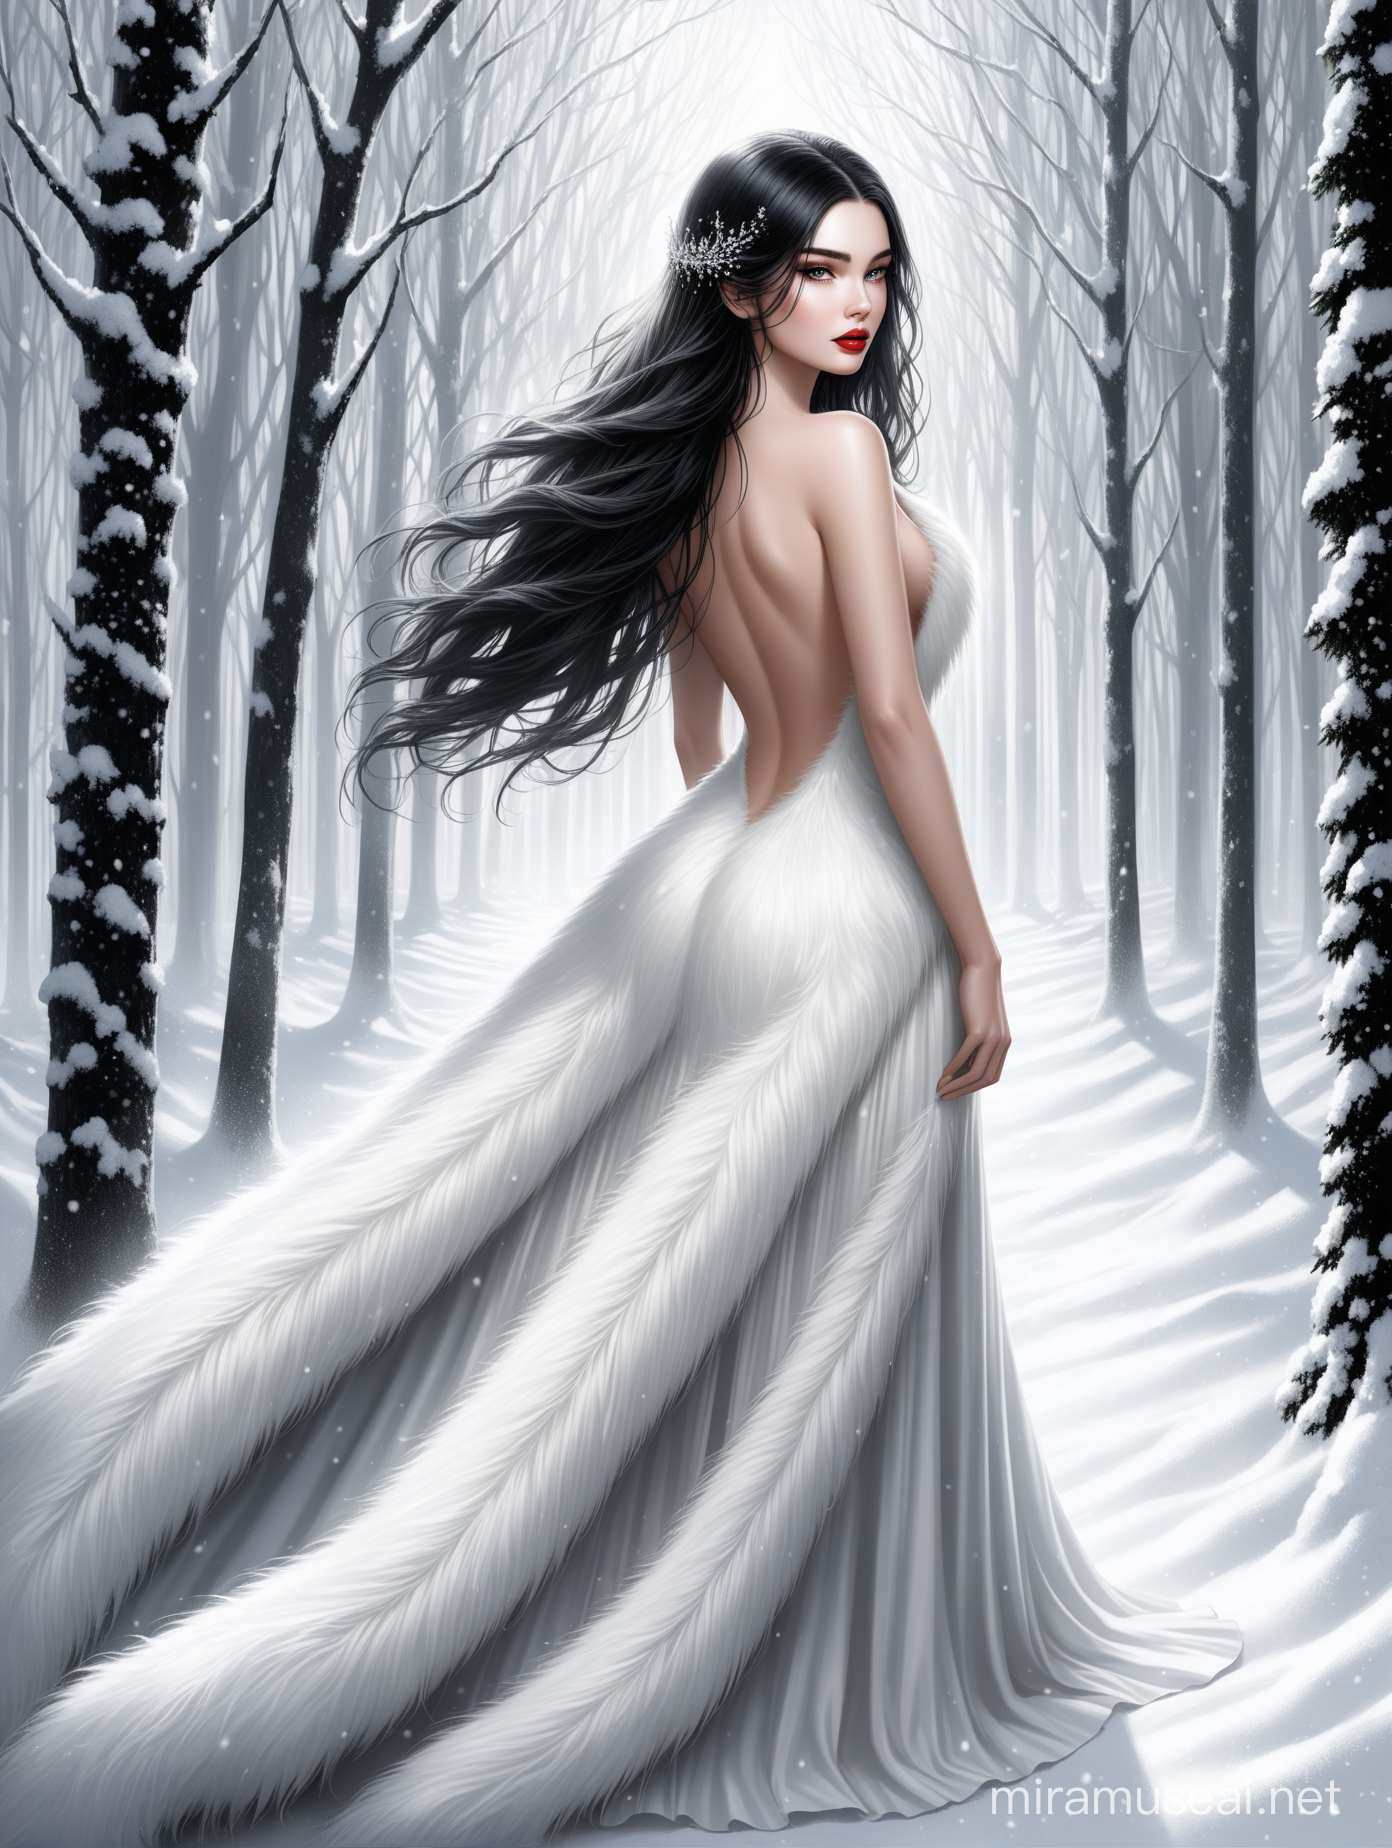 Aivision, full body of beautiful young women , full red lips, black hair. In shining snow - white , Long fur dress with open back , shining forest around . fairy tale , realistic facial features . Realistic hair texture,elegant , crispy quality Federico Bebber's expressive, black and white color